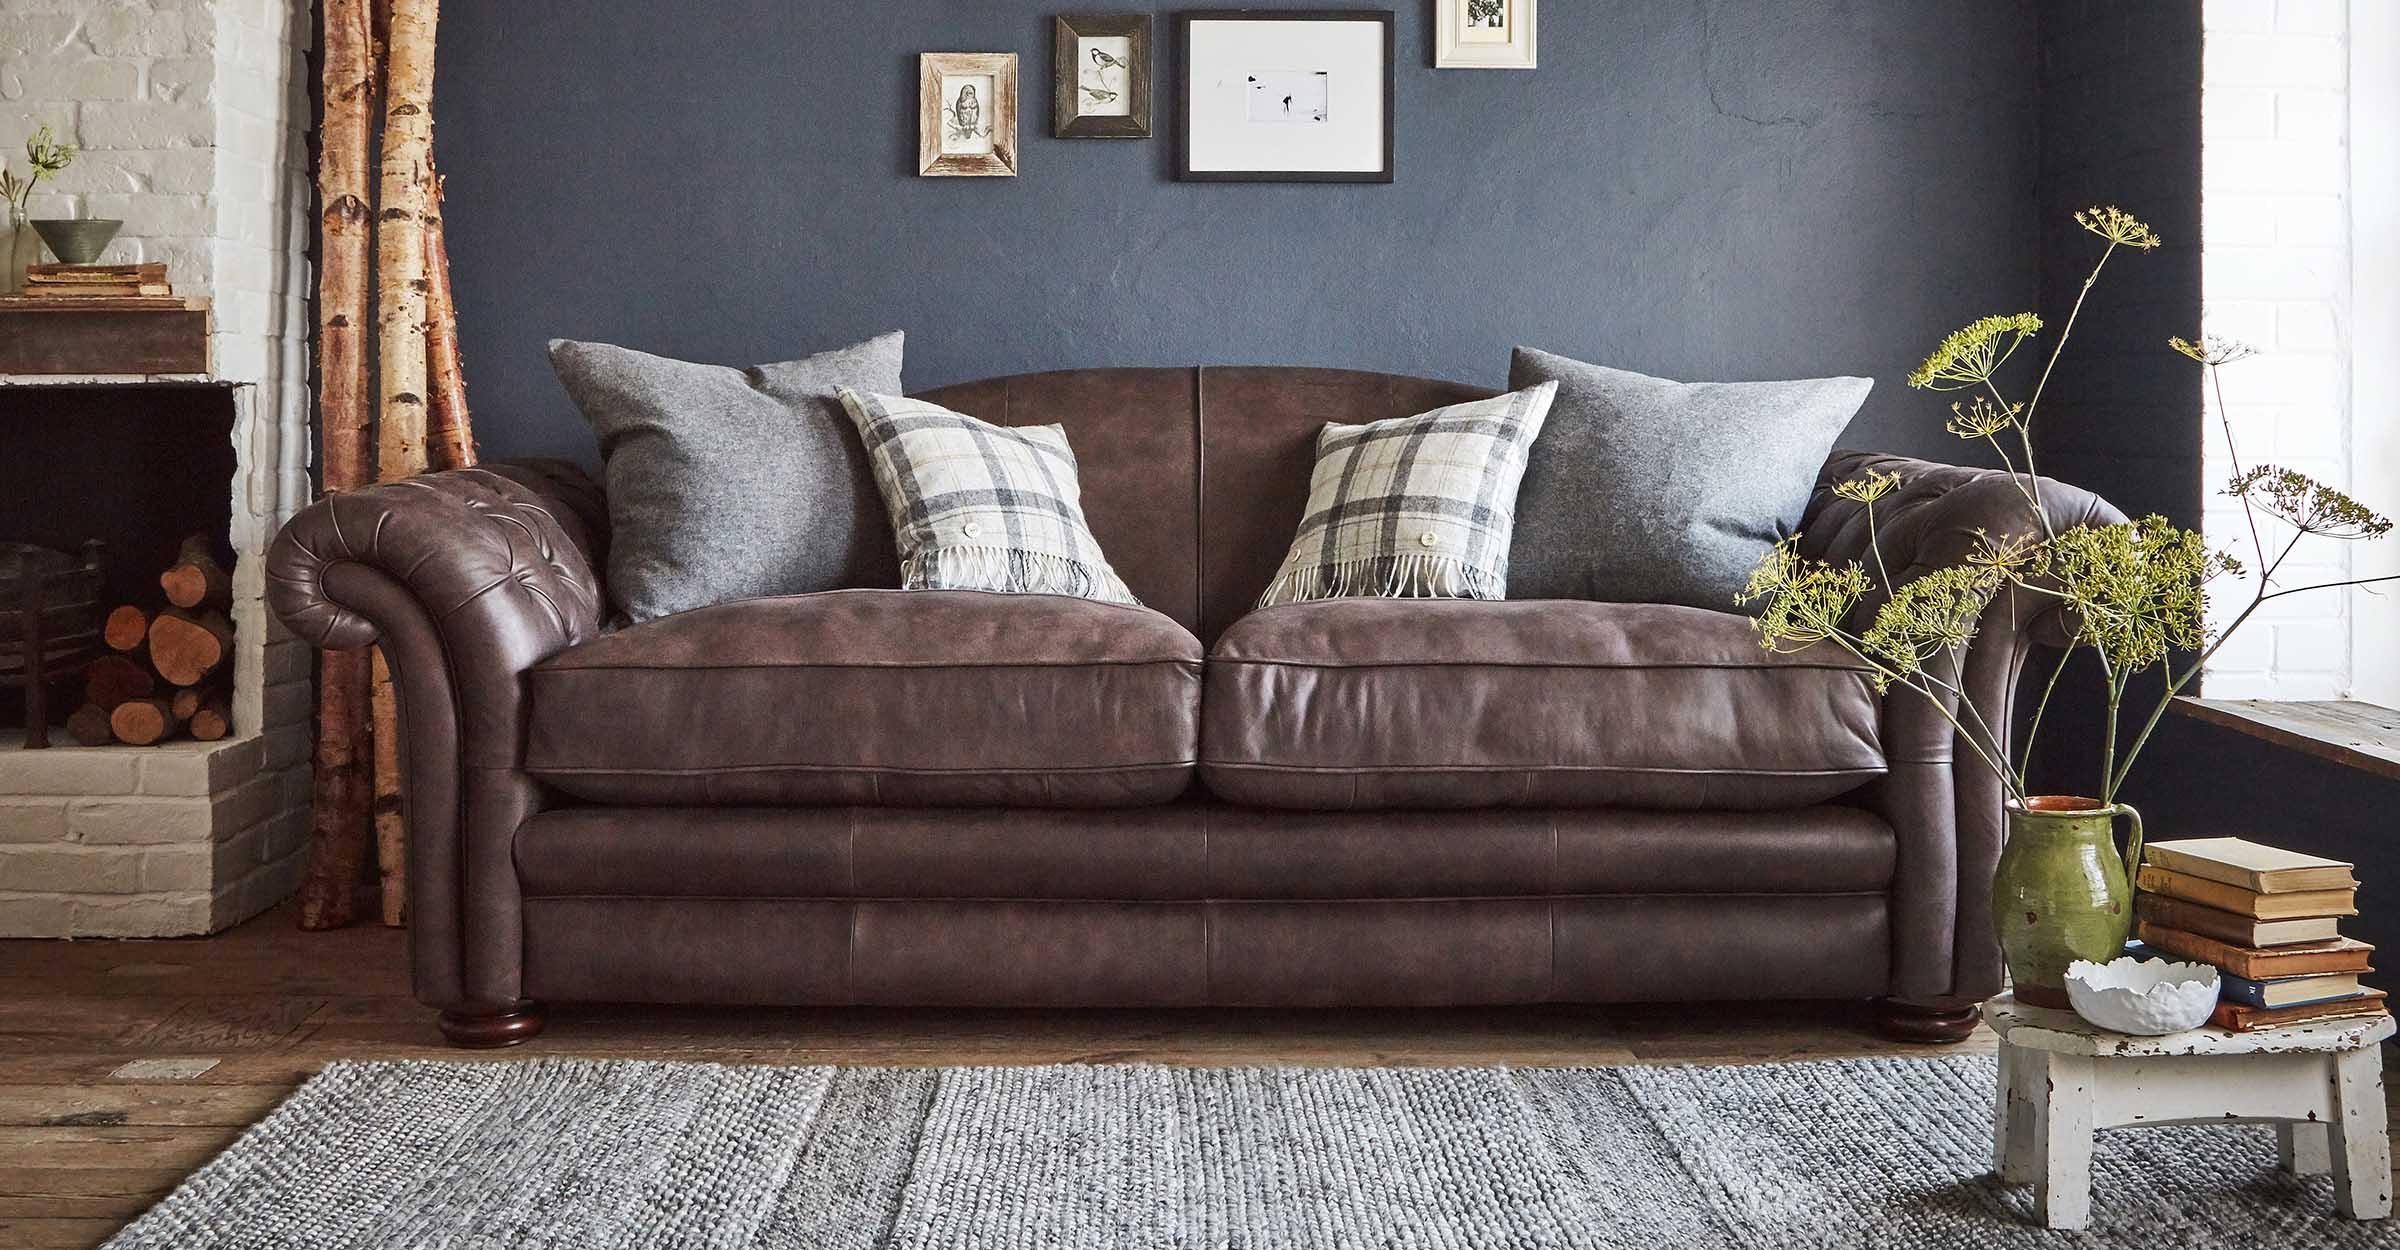 Brown Sofas Dfs, Dark Leather Couch